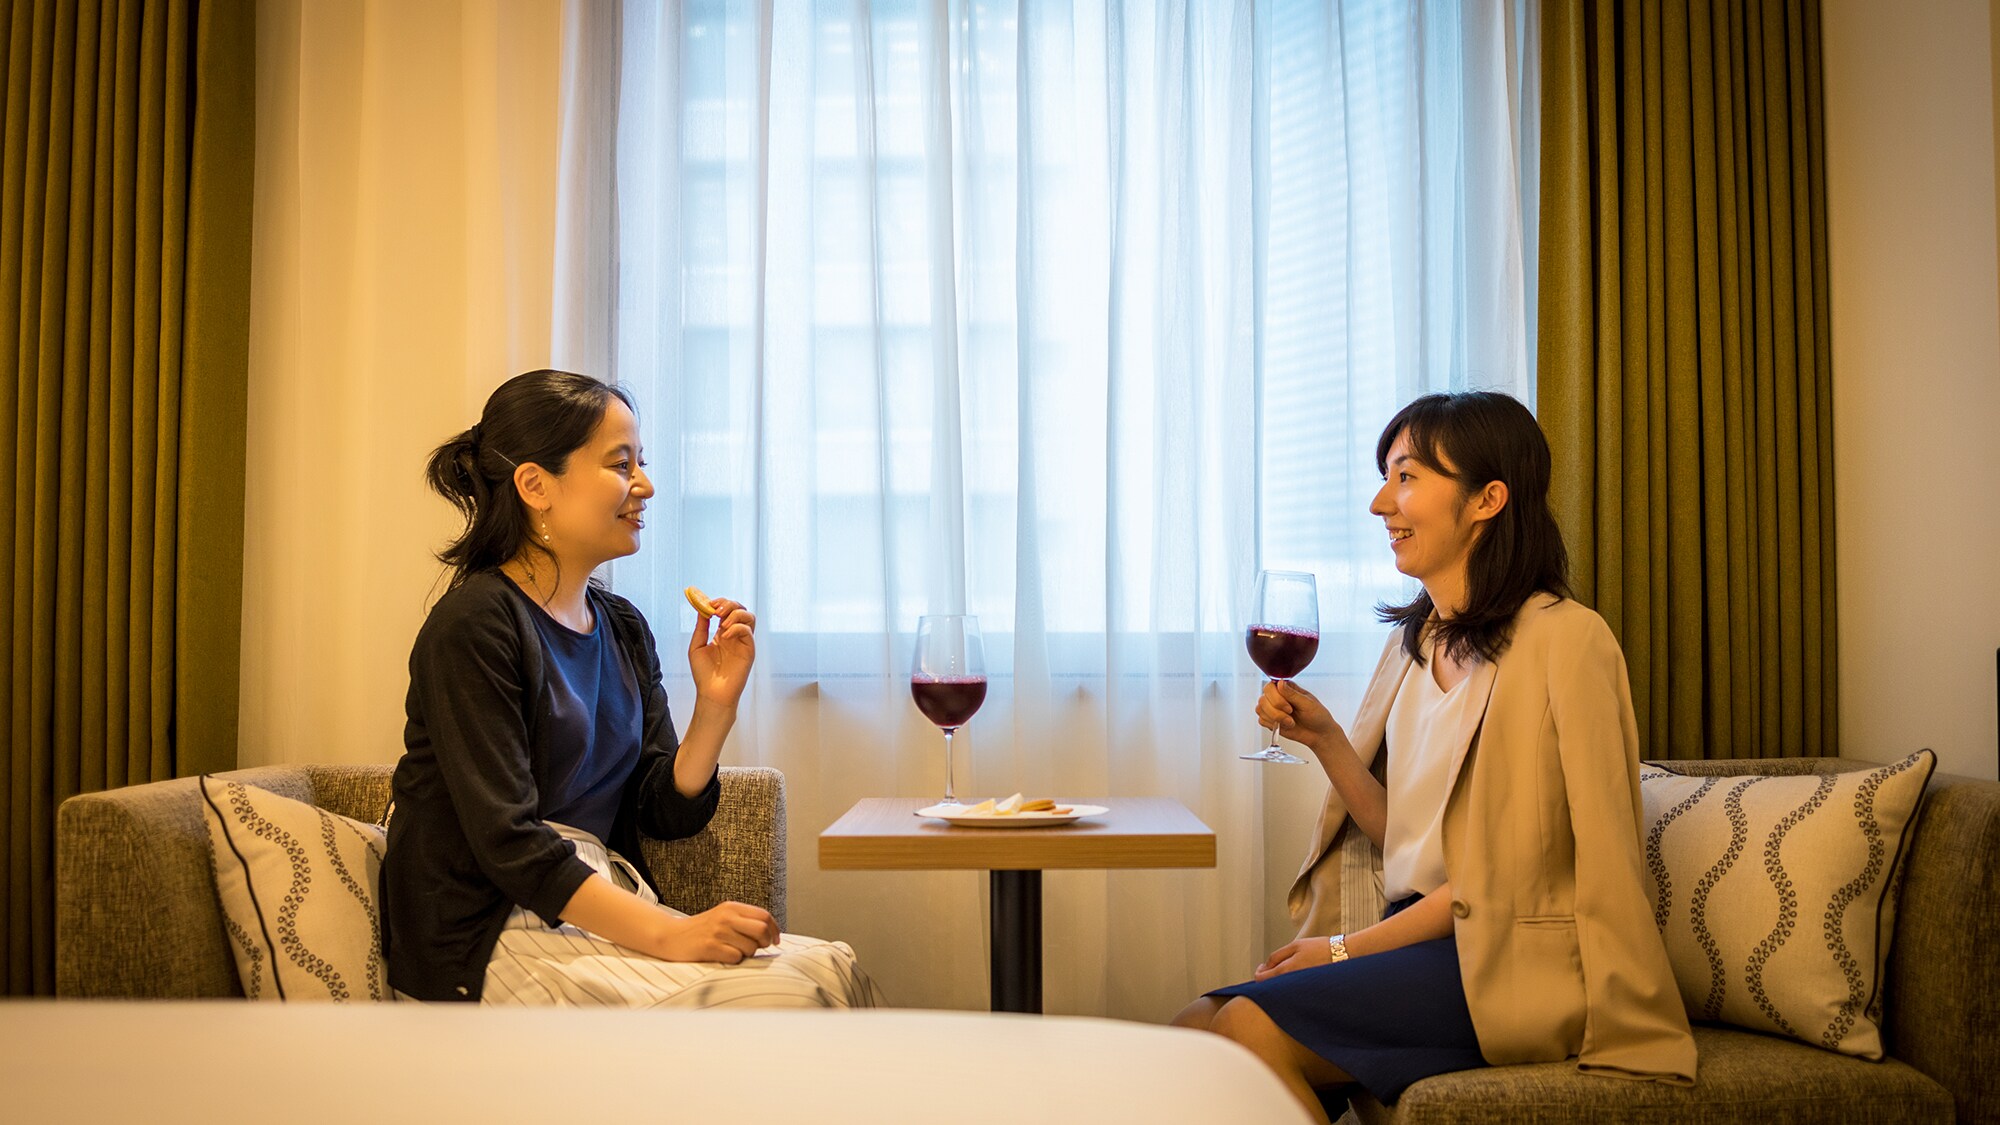 Hotel information and reservations for JR-East Hotel Mets Yokohama